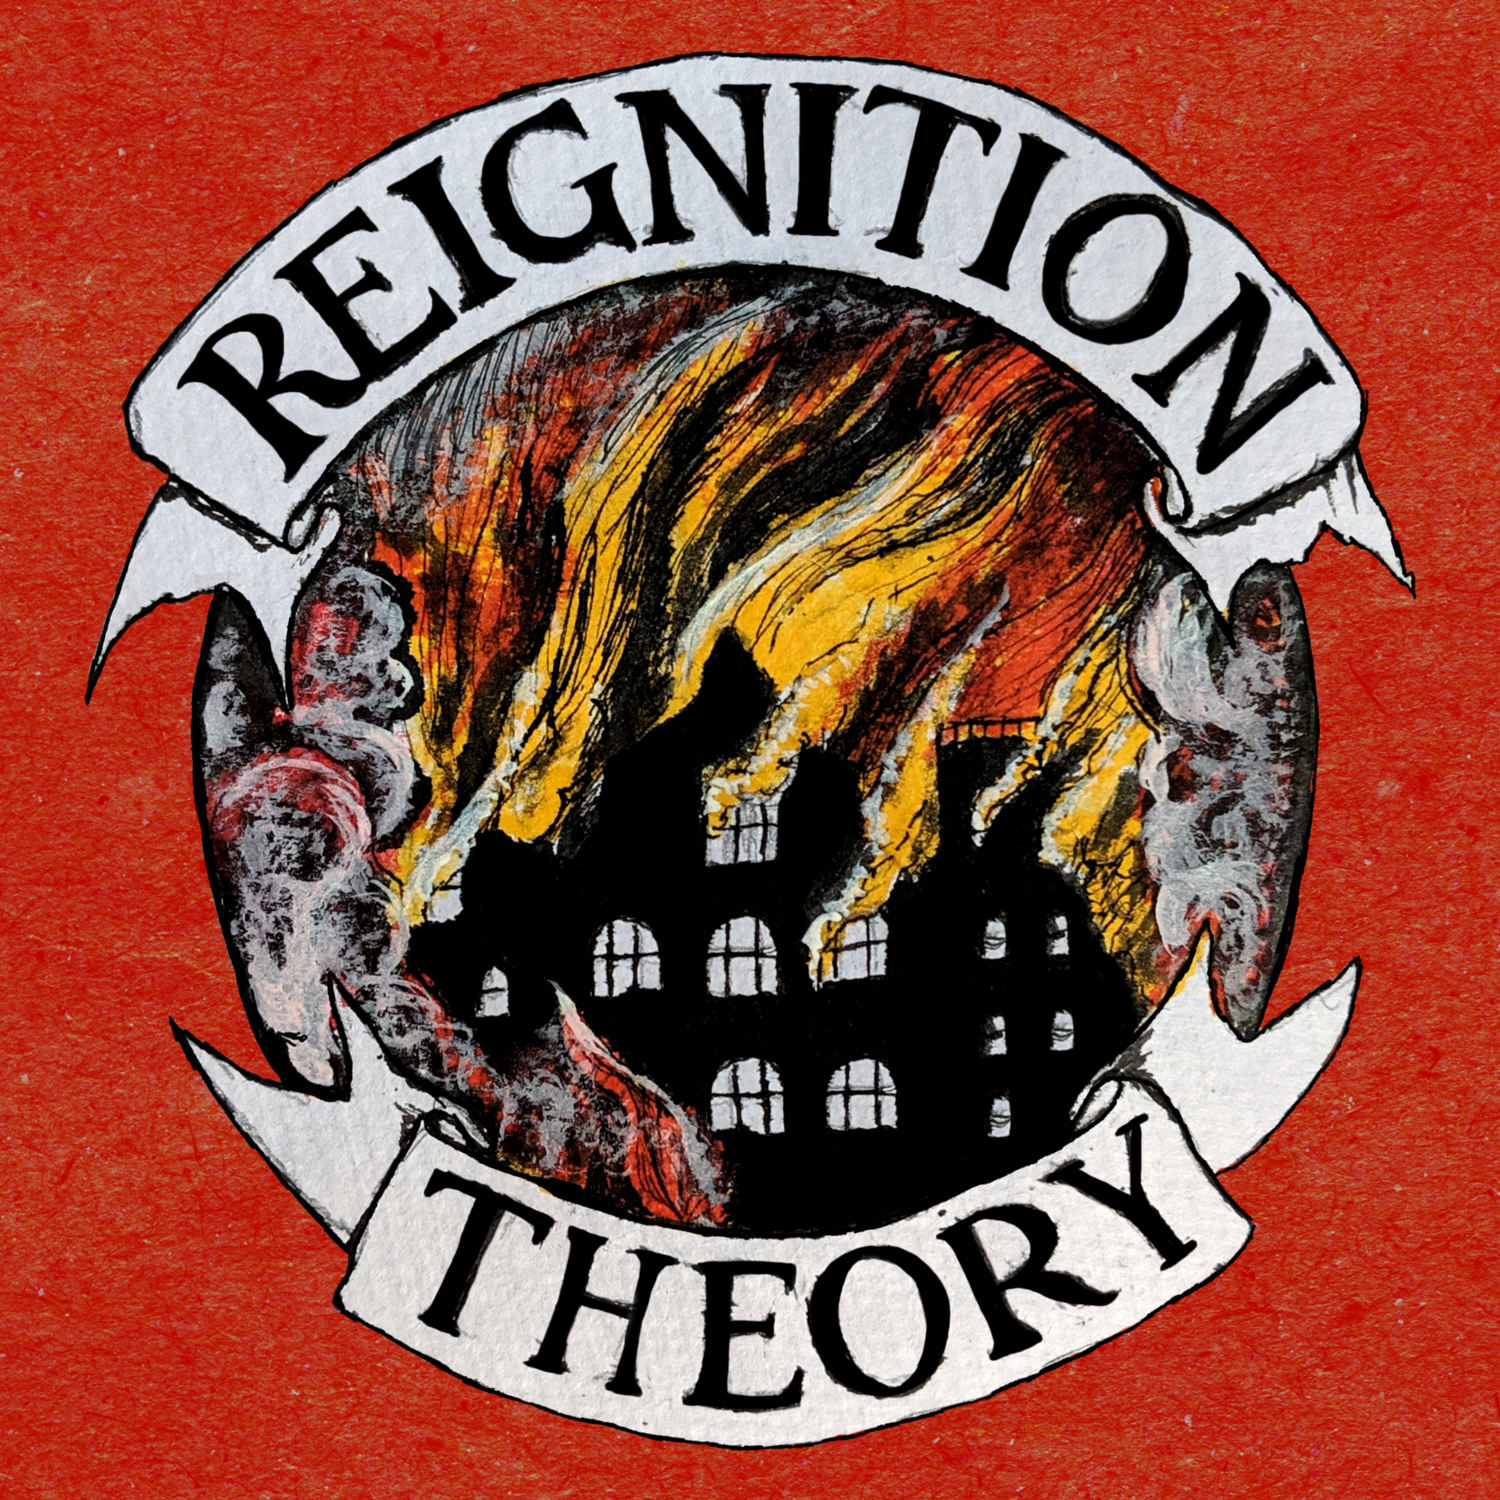 Episode 14 - Destruction - The Reignition Theory